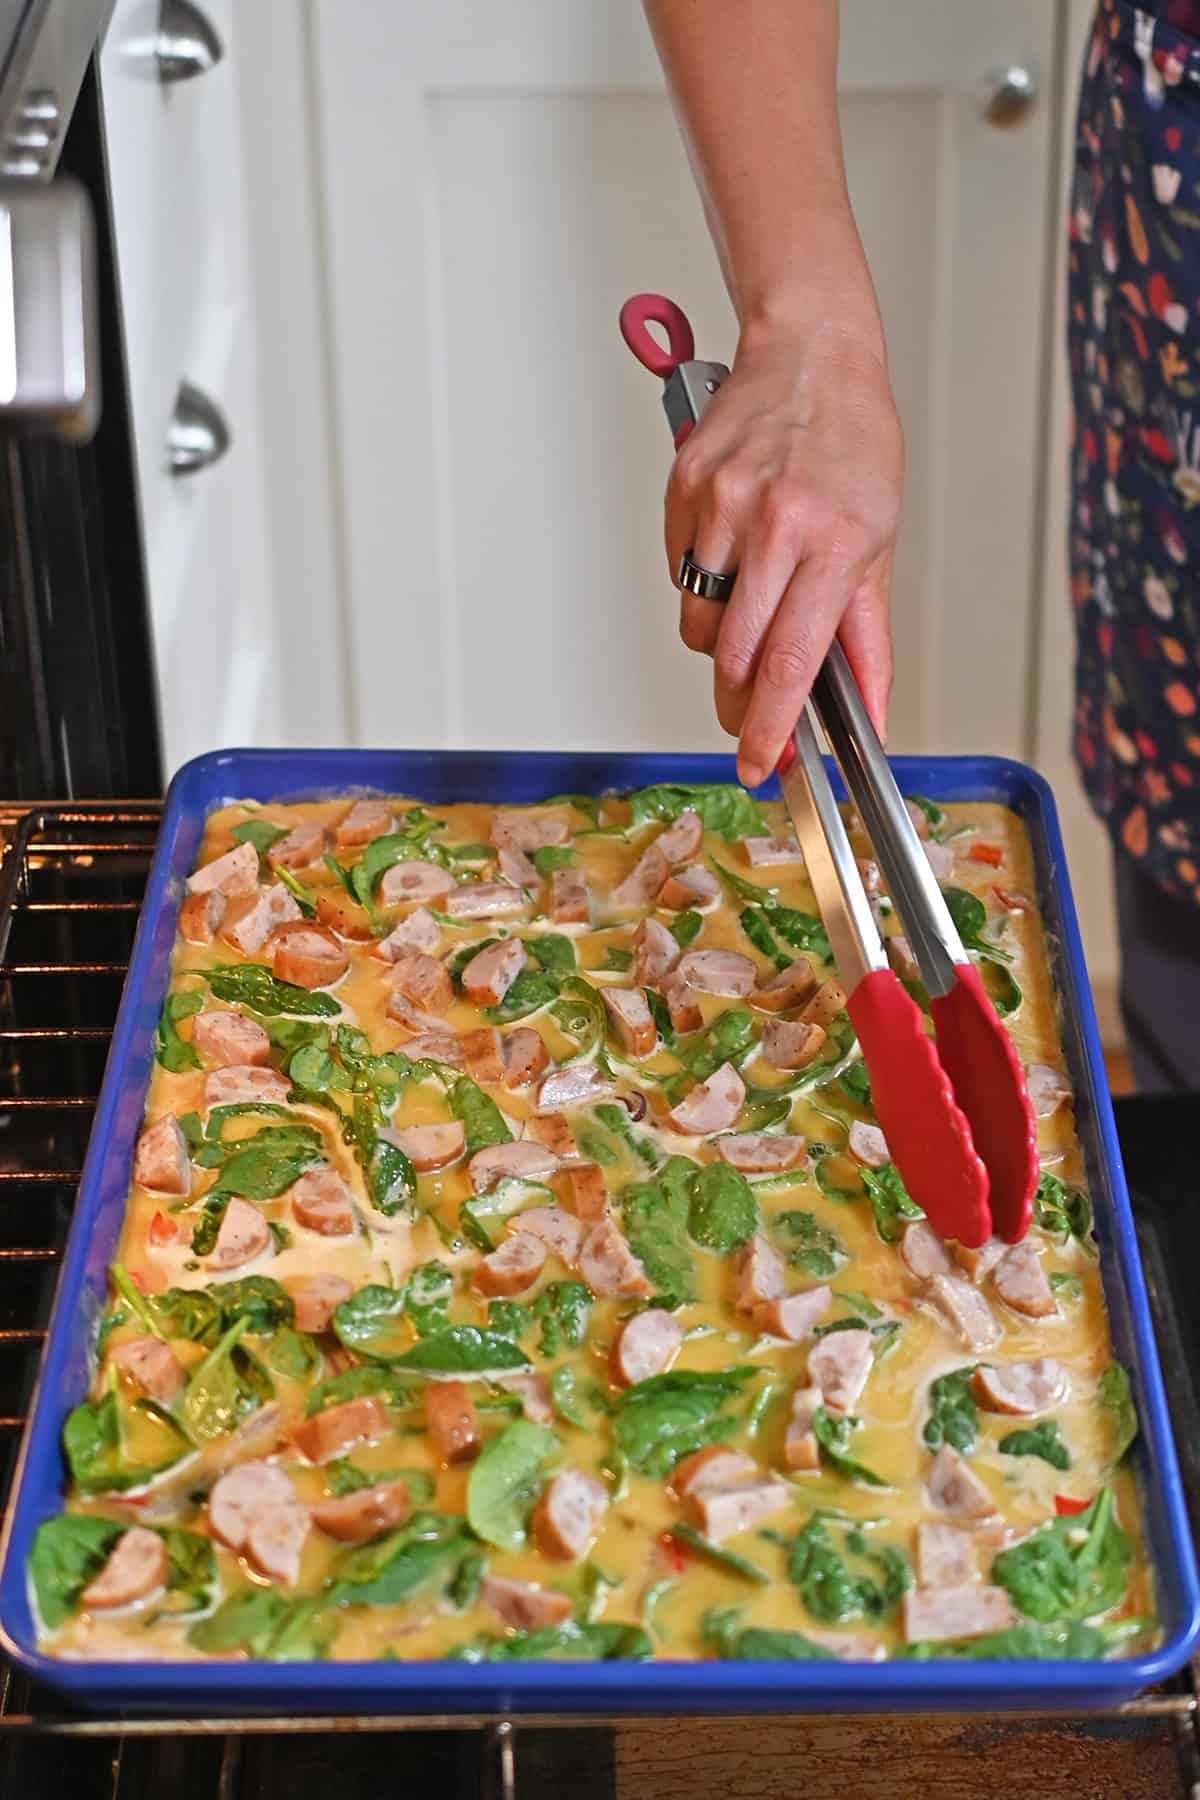 A pair of tongs is rearranging the ingredients on sheet pan eggs before it is put back in the oven.